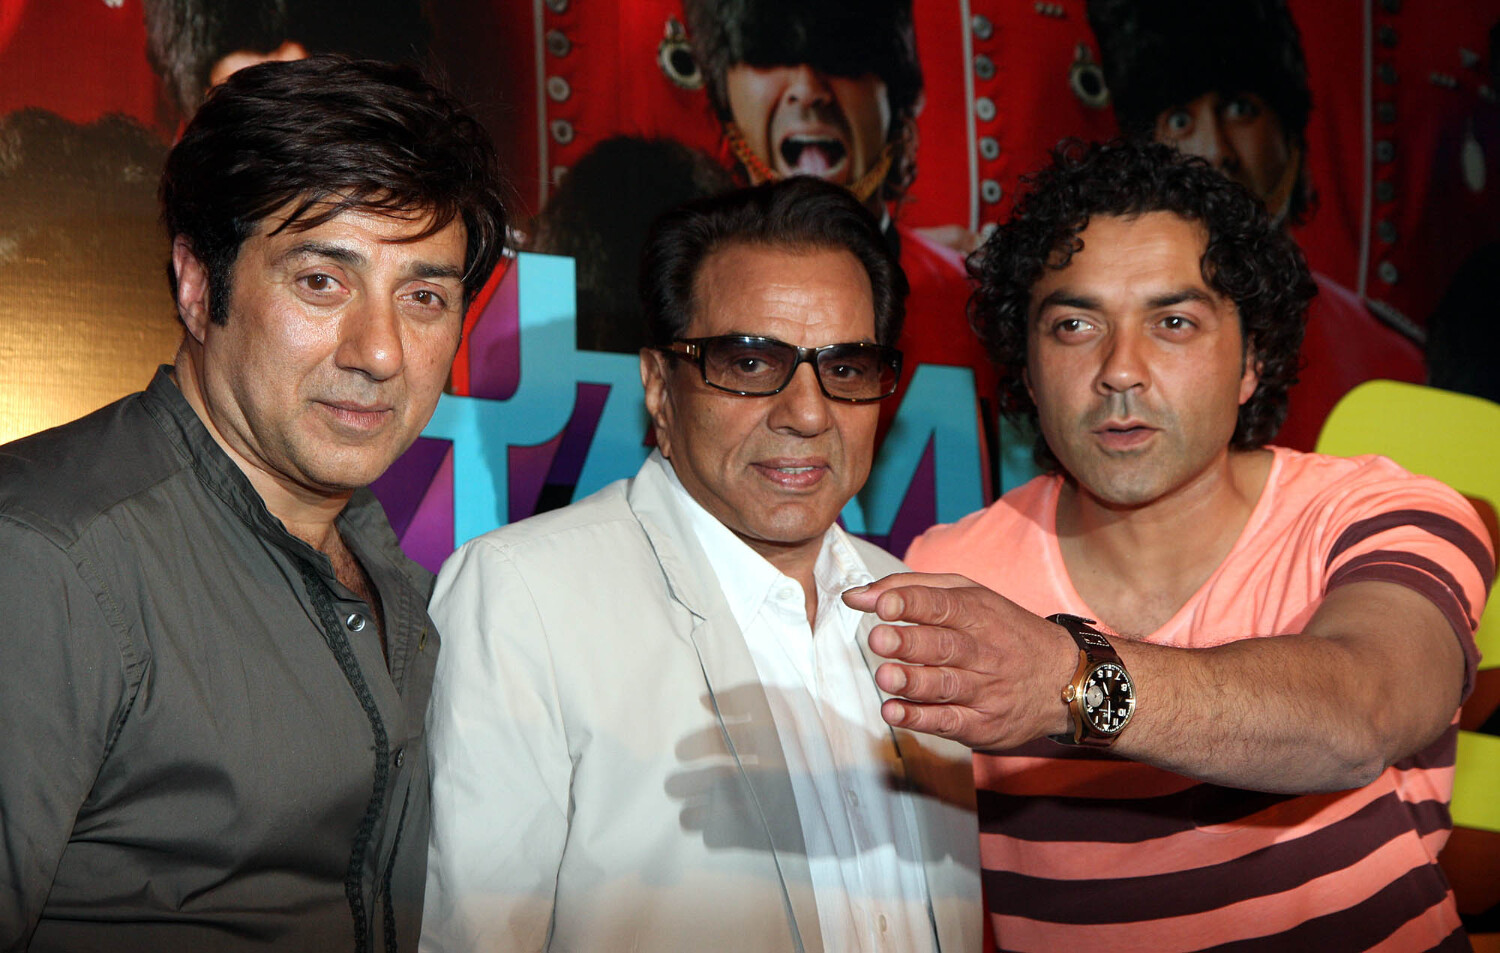  - vp2p1k61pimgv9hr.D.0.Dharmendra-with-sons-Sunny-Deol-and-Bobby-Deol-at-film-YAMLA-PAGLA-DEEWANA-2-first-look-launch-in-Mumbai--4-